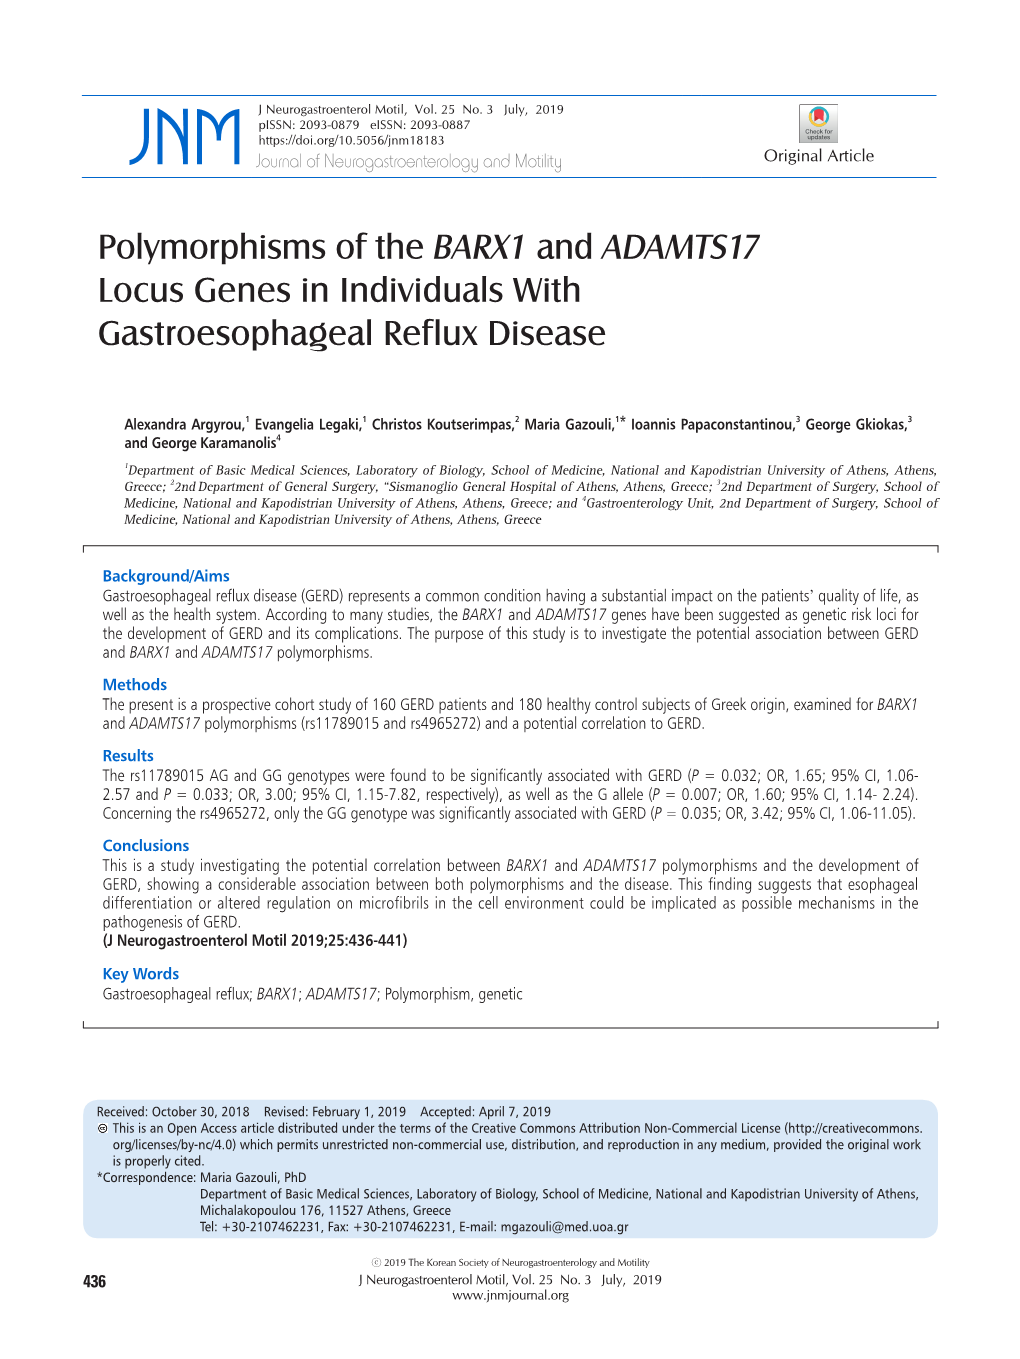 Polymorphisms of the BARX1 and ADAMTS17 Locus Genes in Individuals with Gastroesophageal Reflux Disease